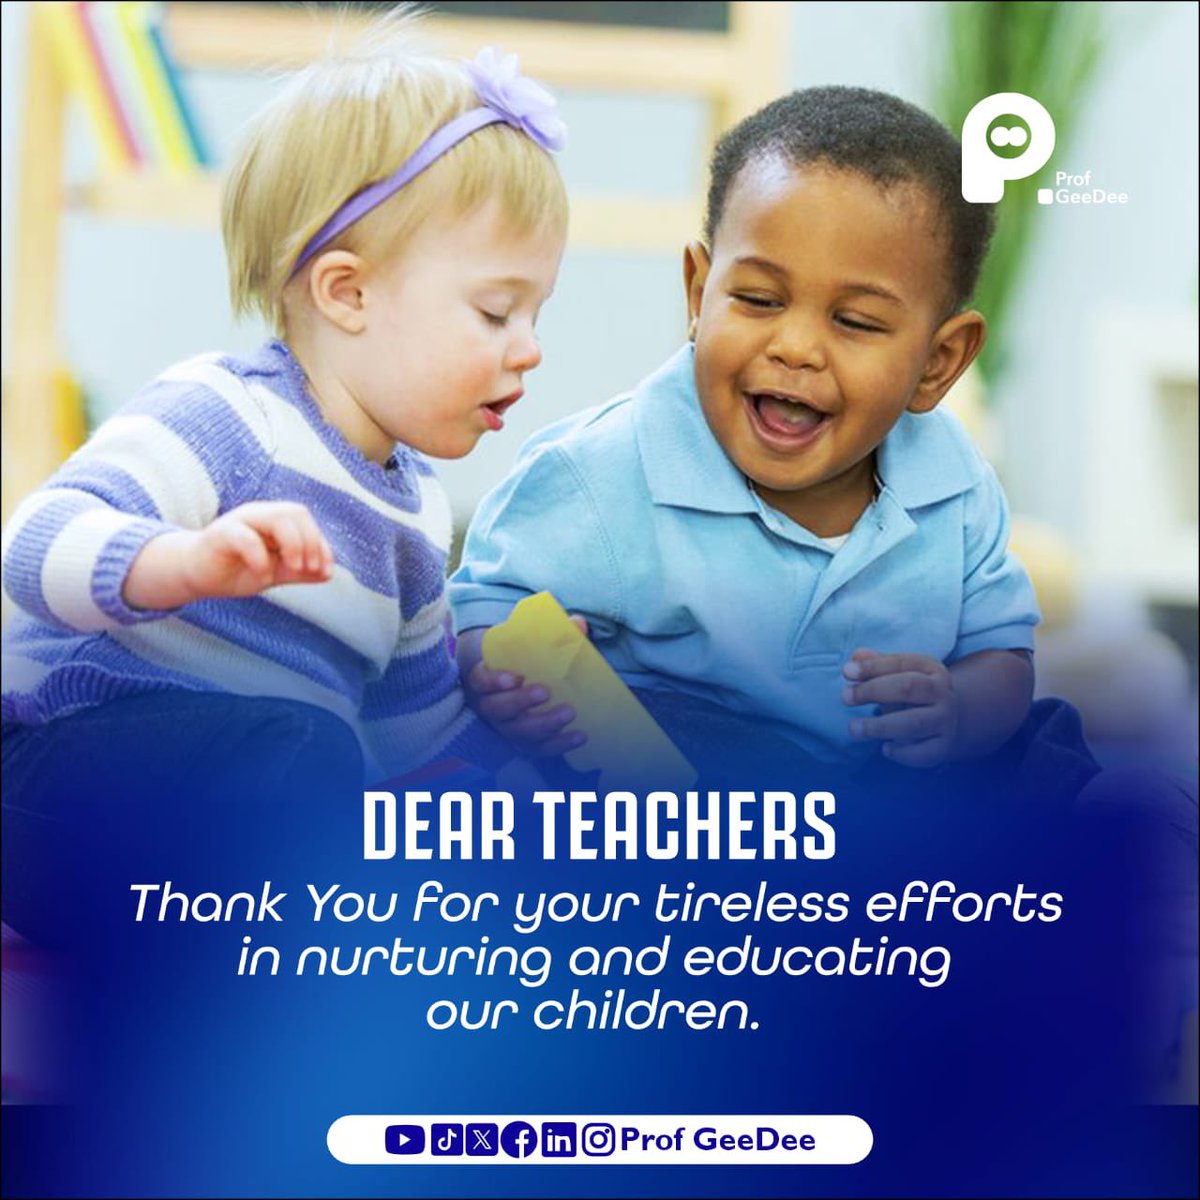 You inspire, educate, and shape the future with your tireless efforts and patience.

 Thank you for making a profound impact on our children's lives.

#earlyyears
#earlylearning
#earlychildhoodeducation
#dearteacherseries
#profgeedee